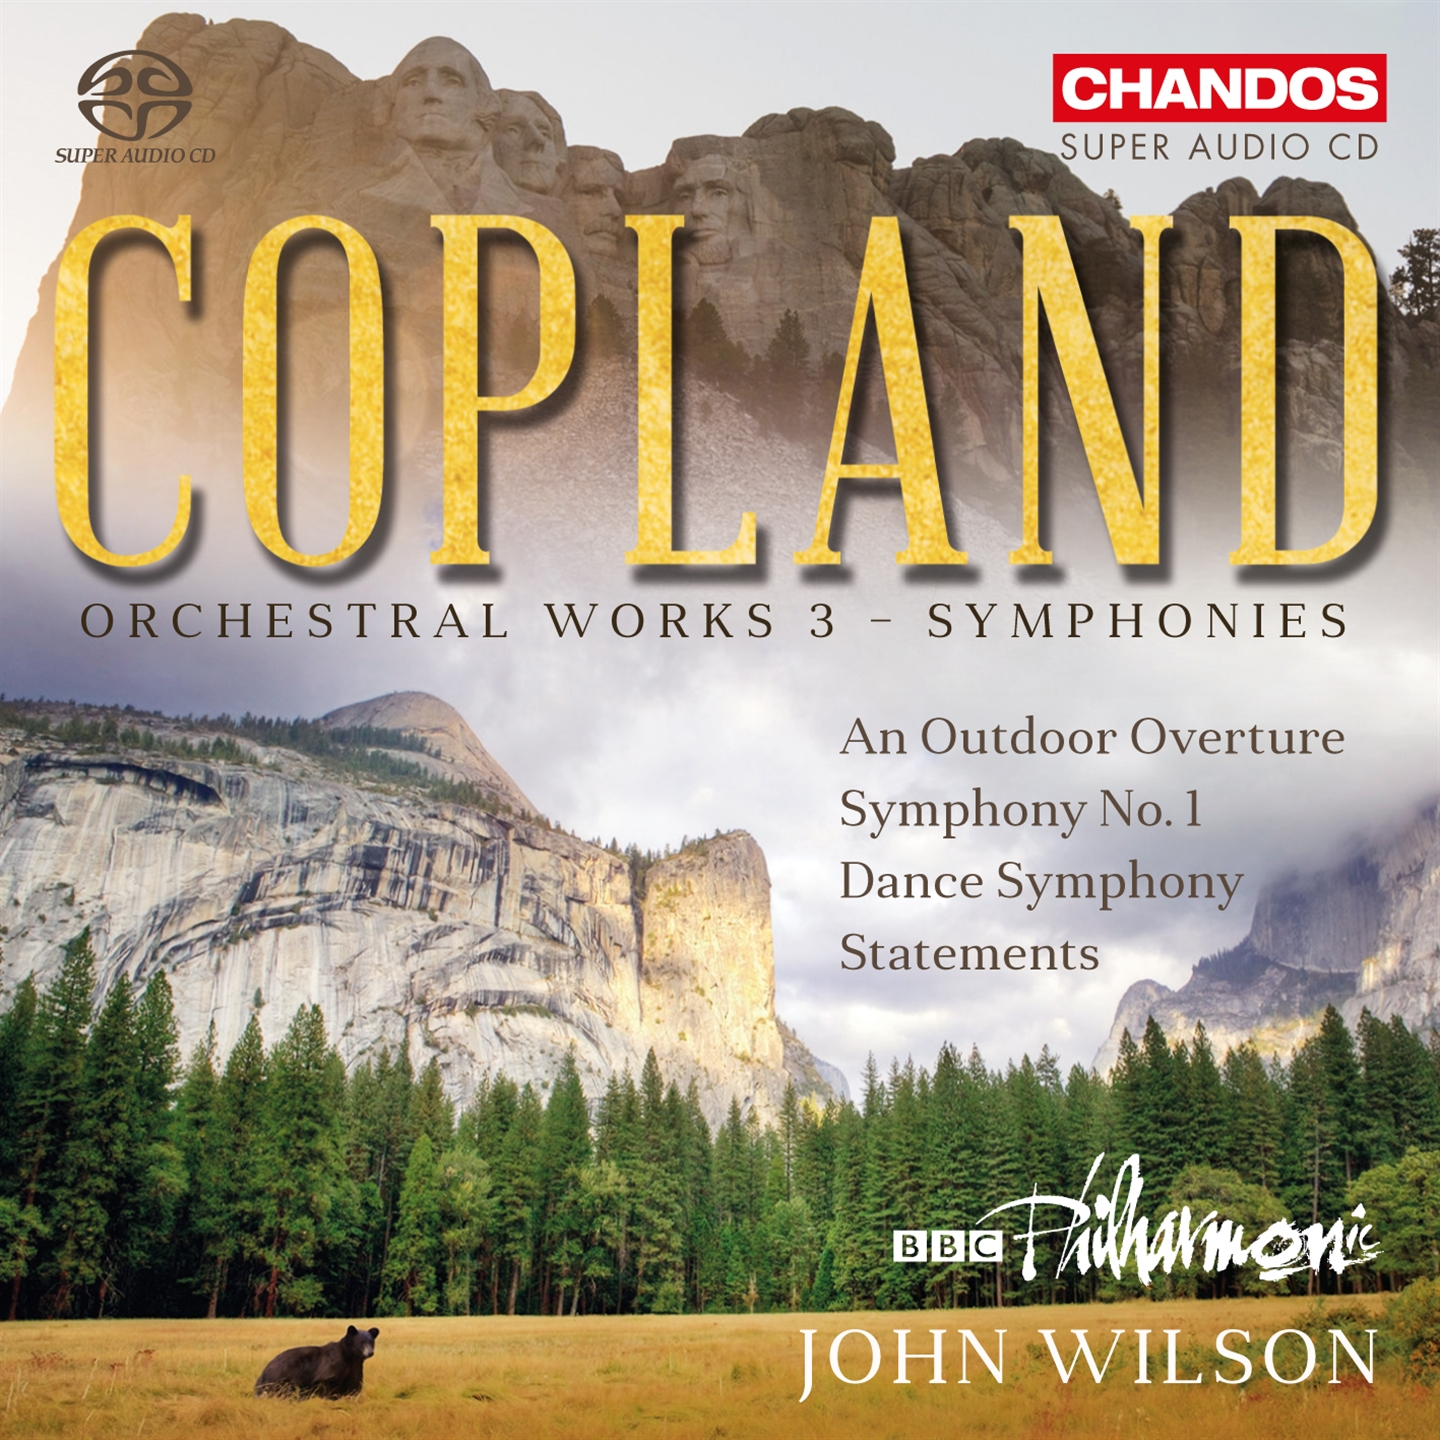 COPLAND: ORCHESTRAL WORKS VOL. 3